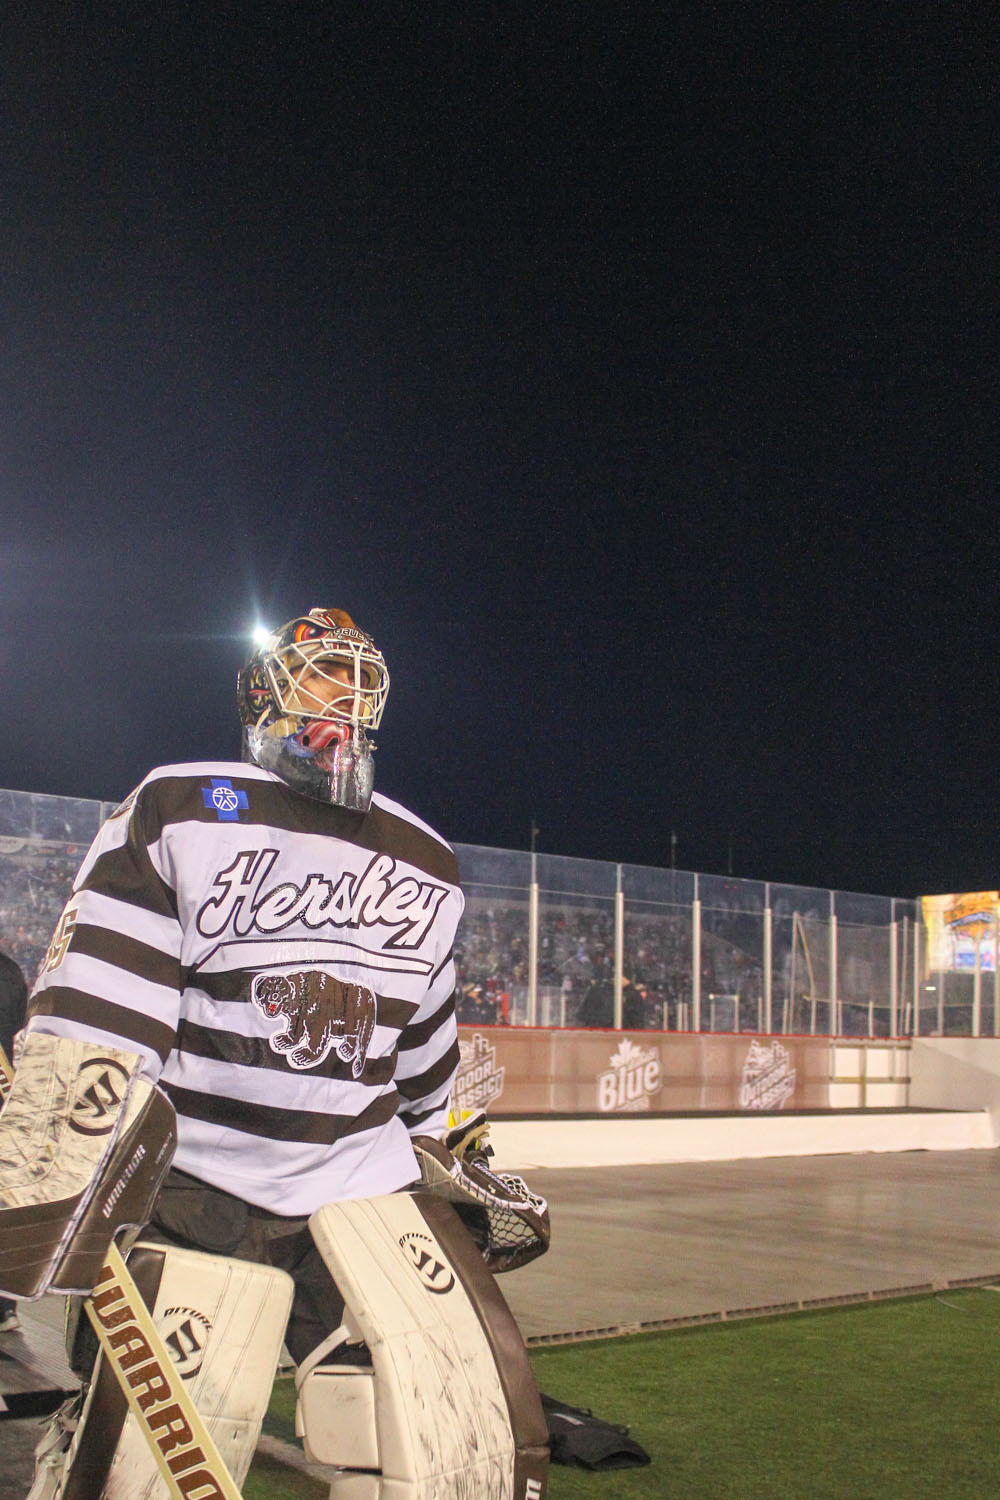 AHL provides fans an outdoor classic of its own in Hershey – The